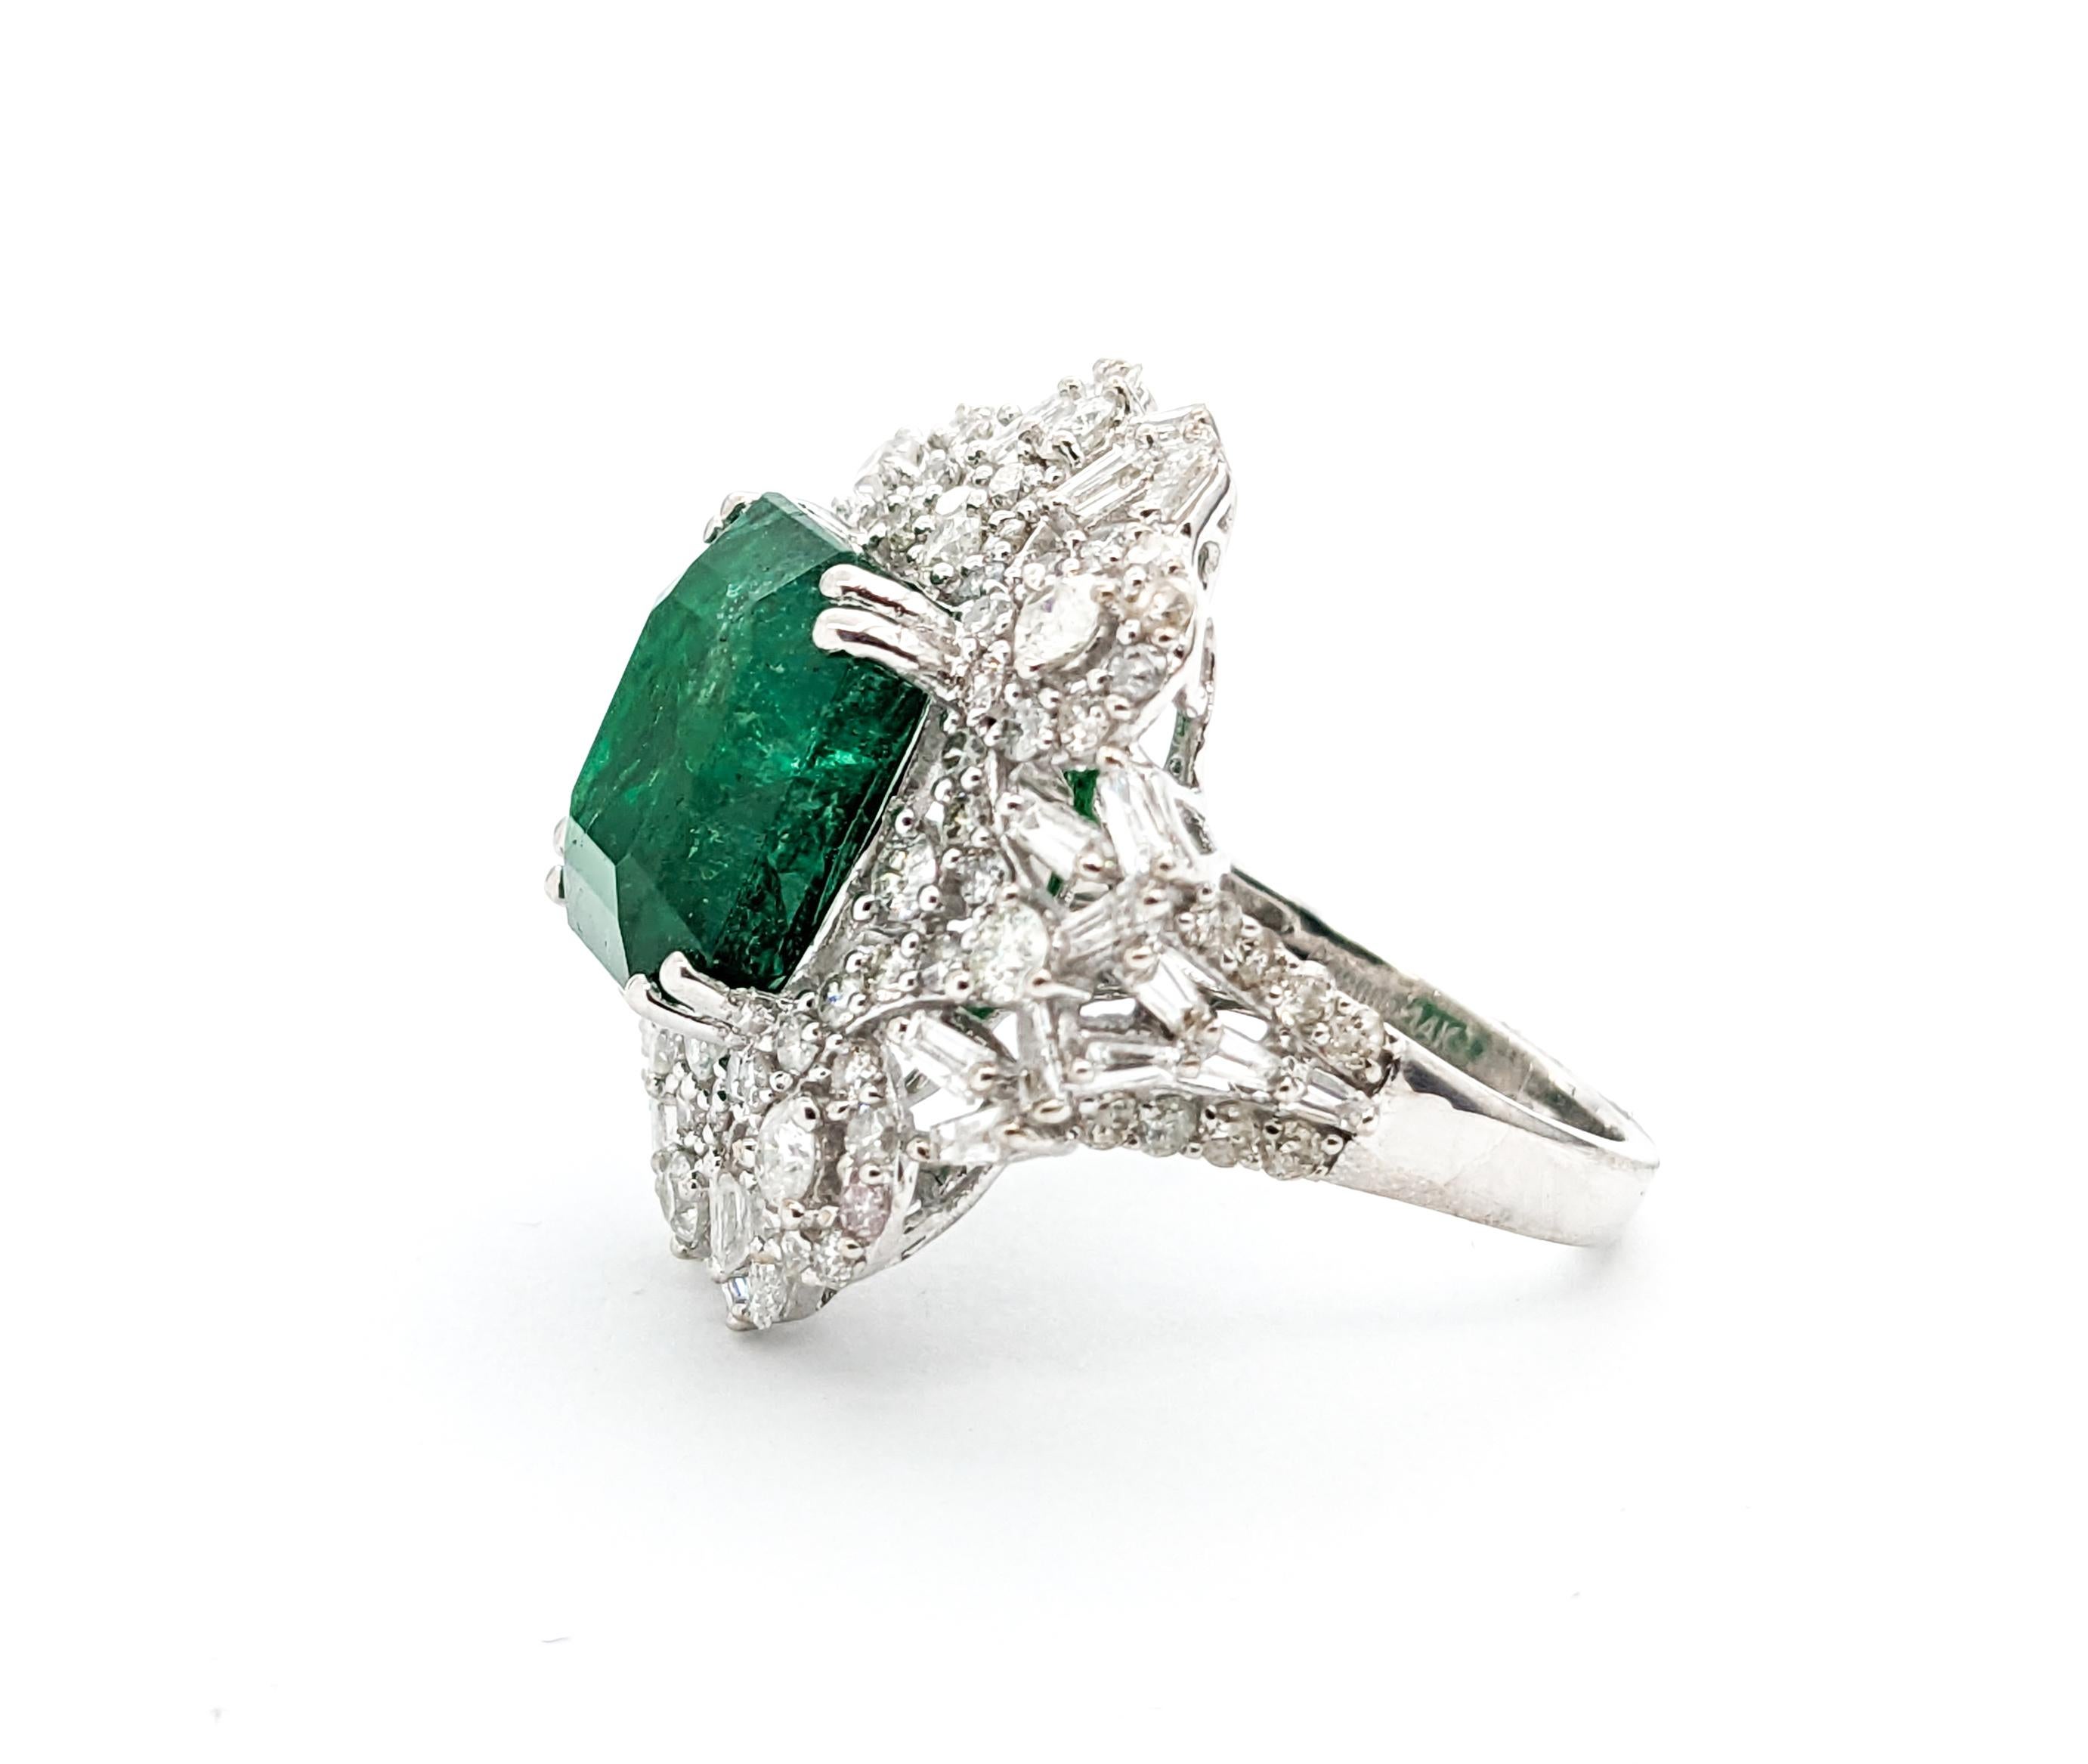 Contemporary 8.24ct Emerald & Diamond Cocktail Ring In White Gold